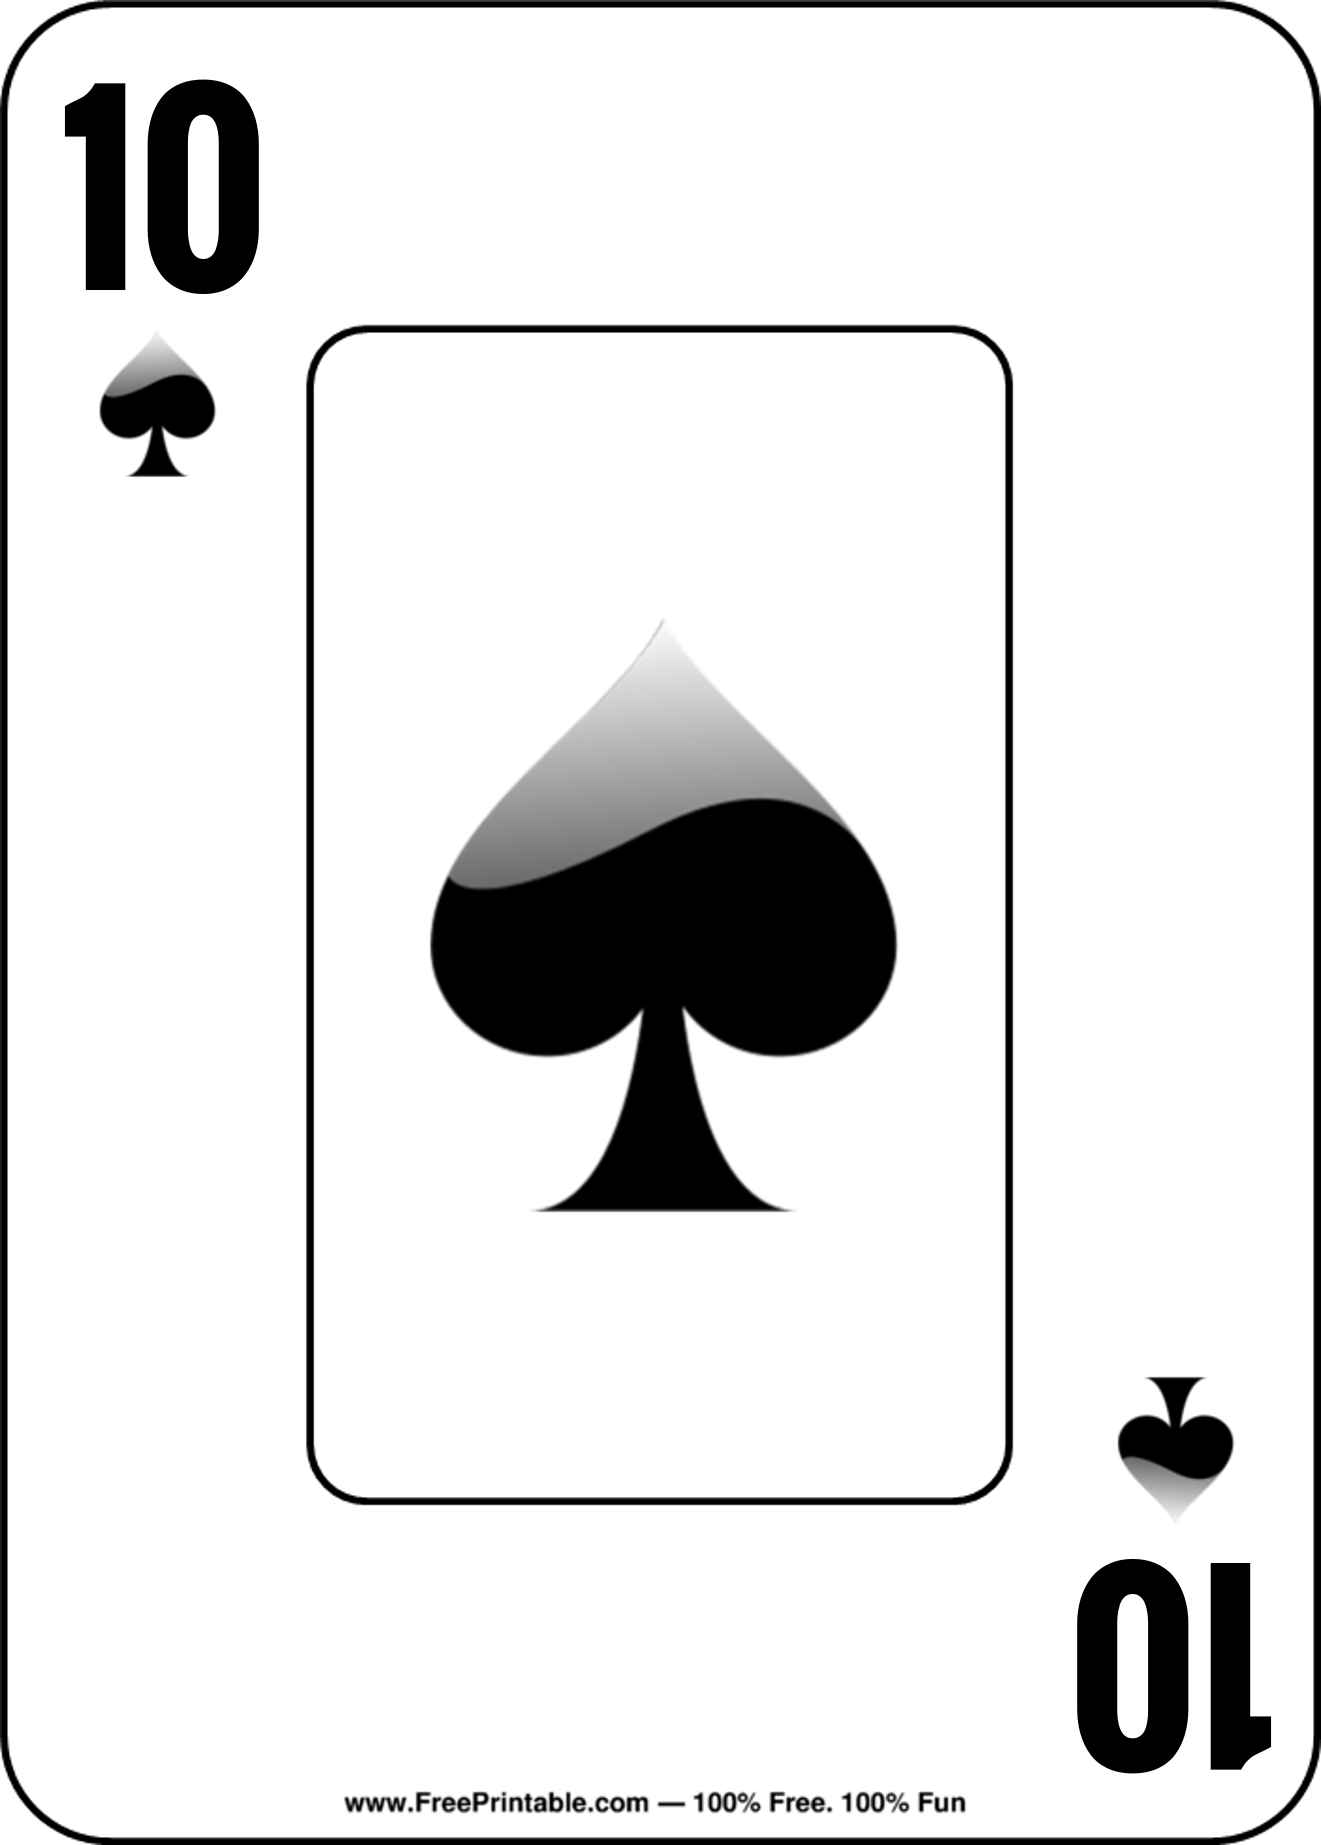 Customize Your Free Printable Ten Of Spades Playing Card